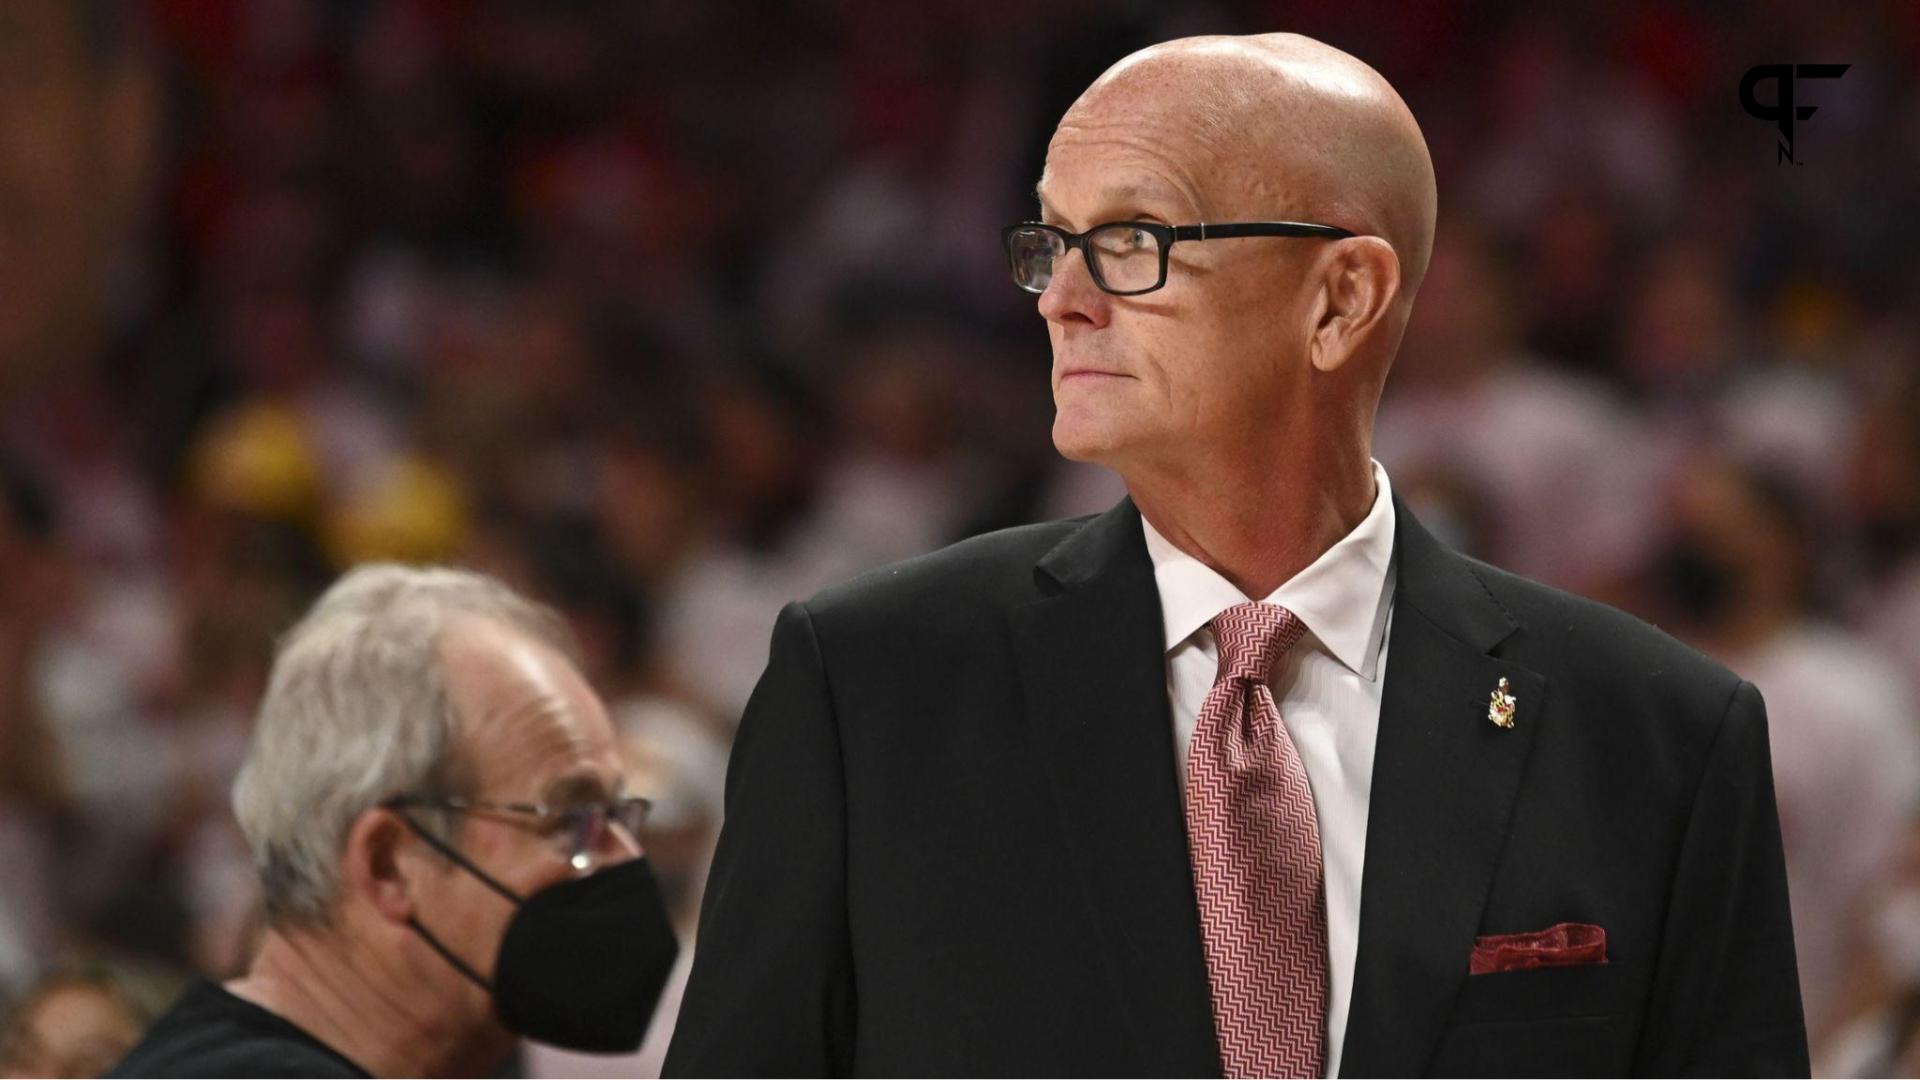 Sports broadcaster Scott Van Pelt stands court side during the game between the Maryland Terrapins and the Ohio State Buckeyes at Xfinity Center.